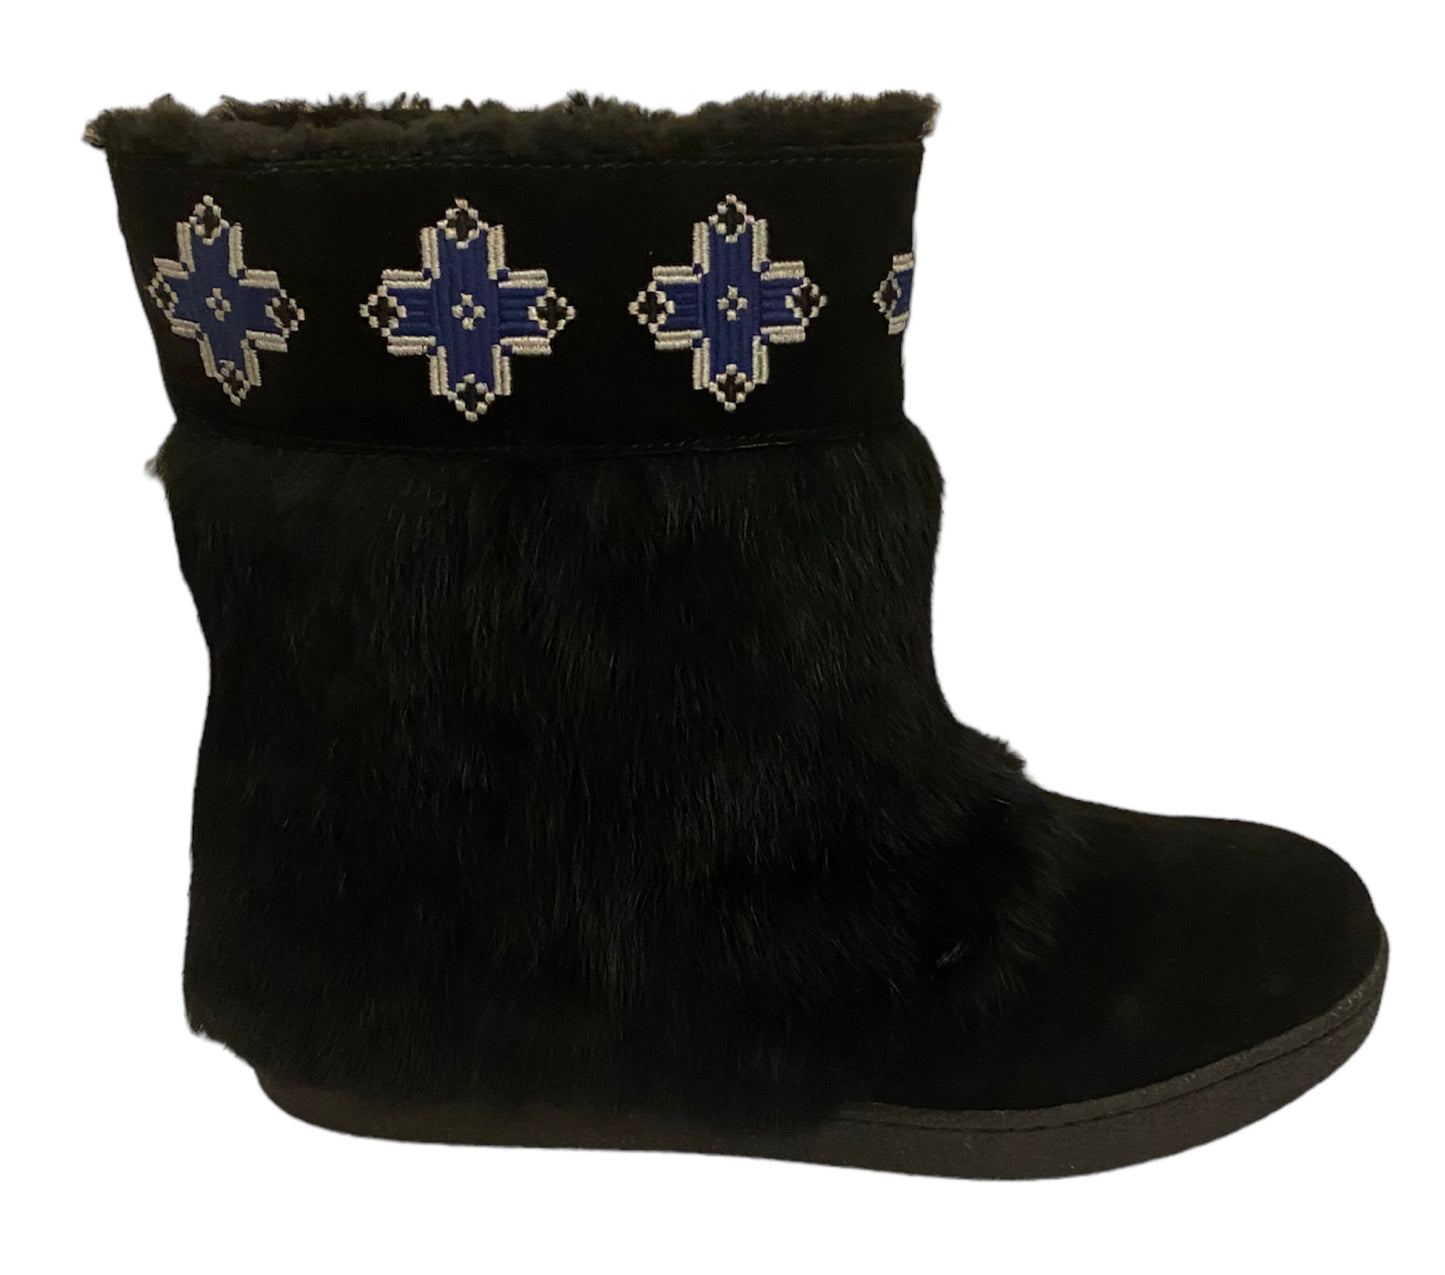 TORY BURCH Embroidered Fur Bootie Size 8 Eu 39